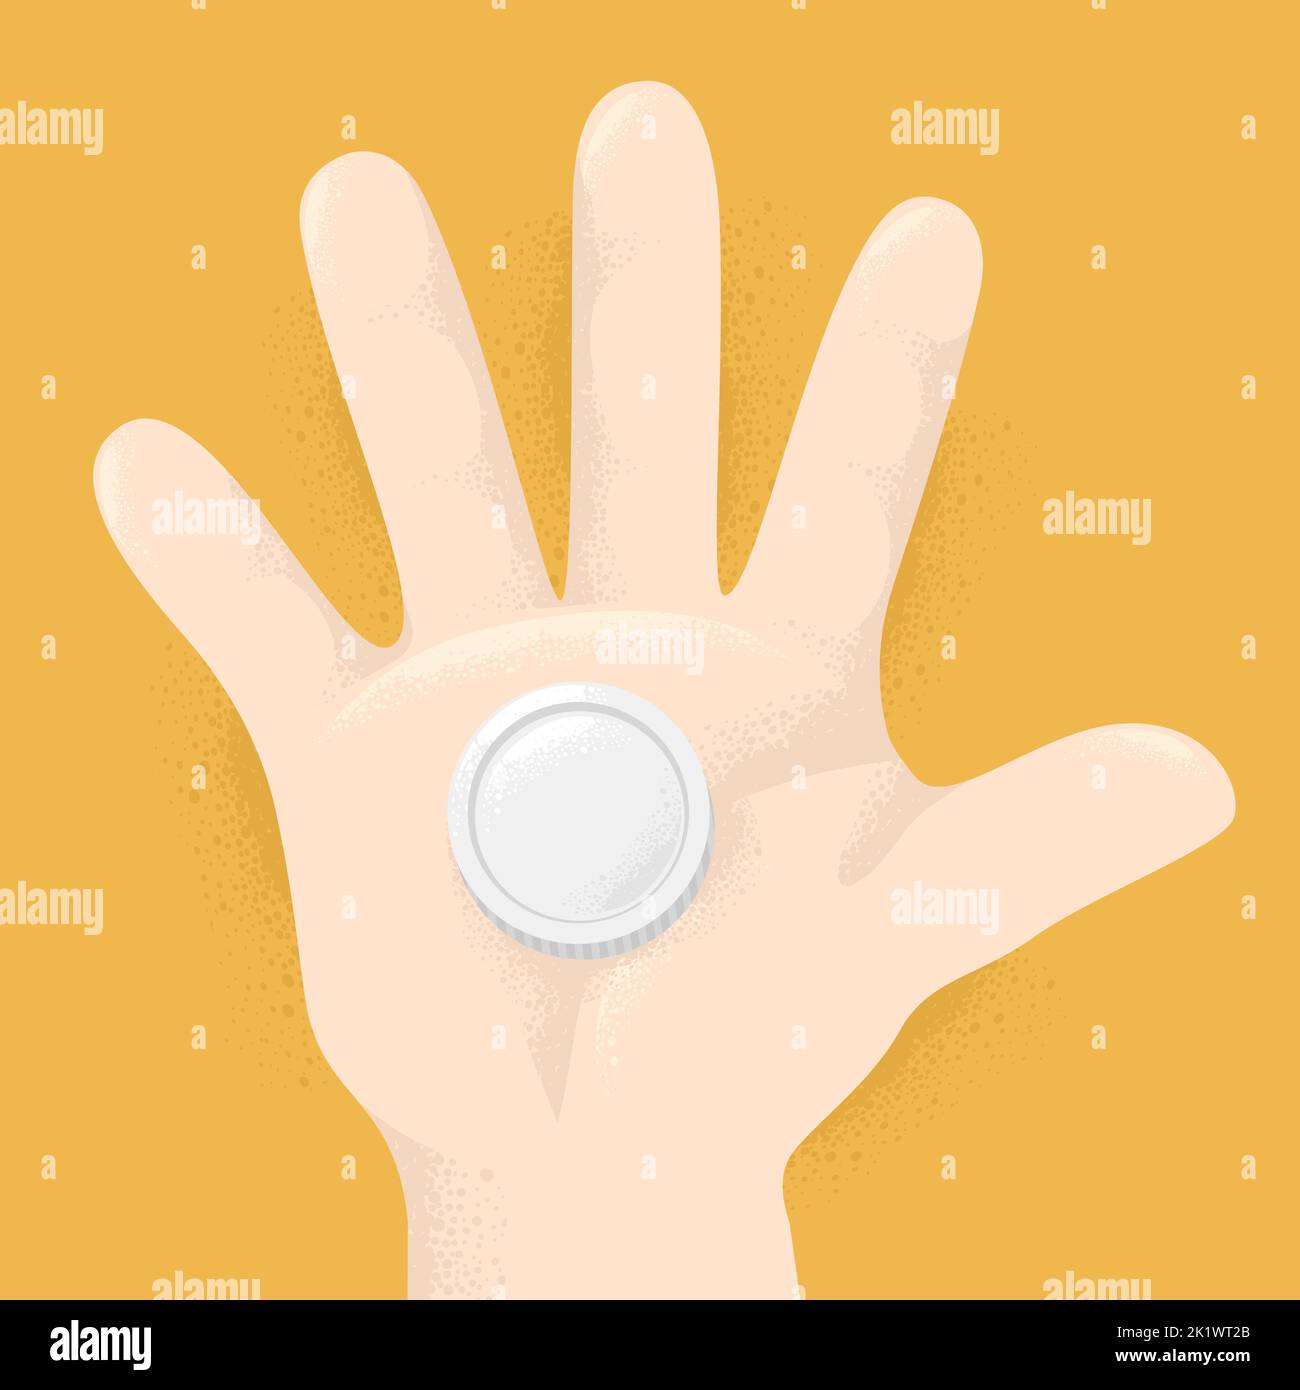 Illustration of a Hand of a Kid with a Silver Coin Stock Photo